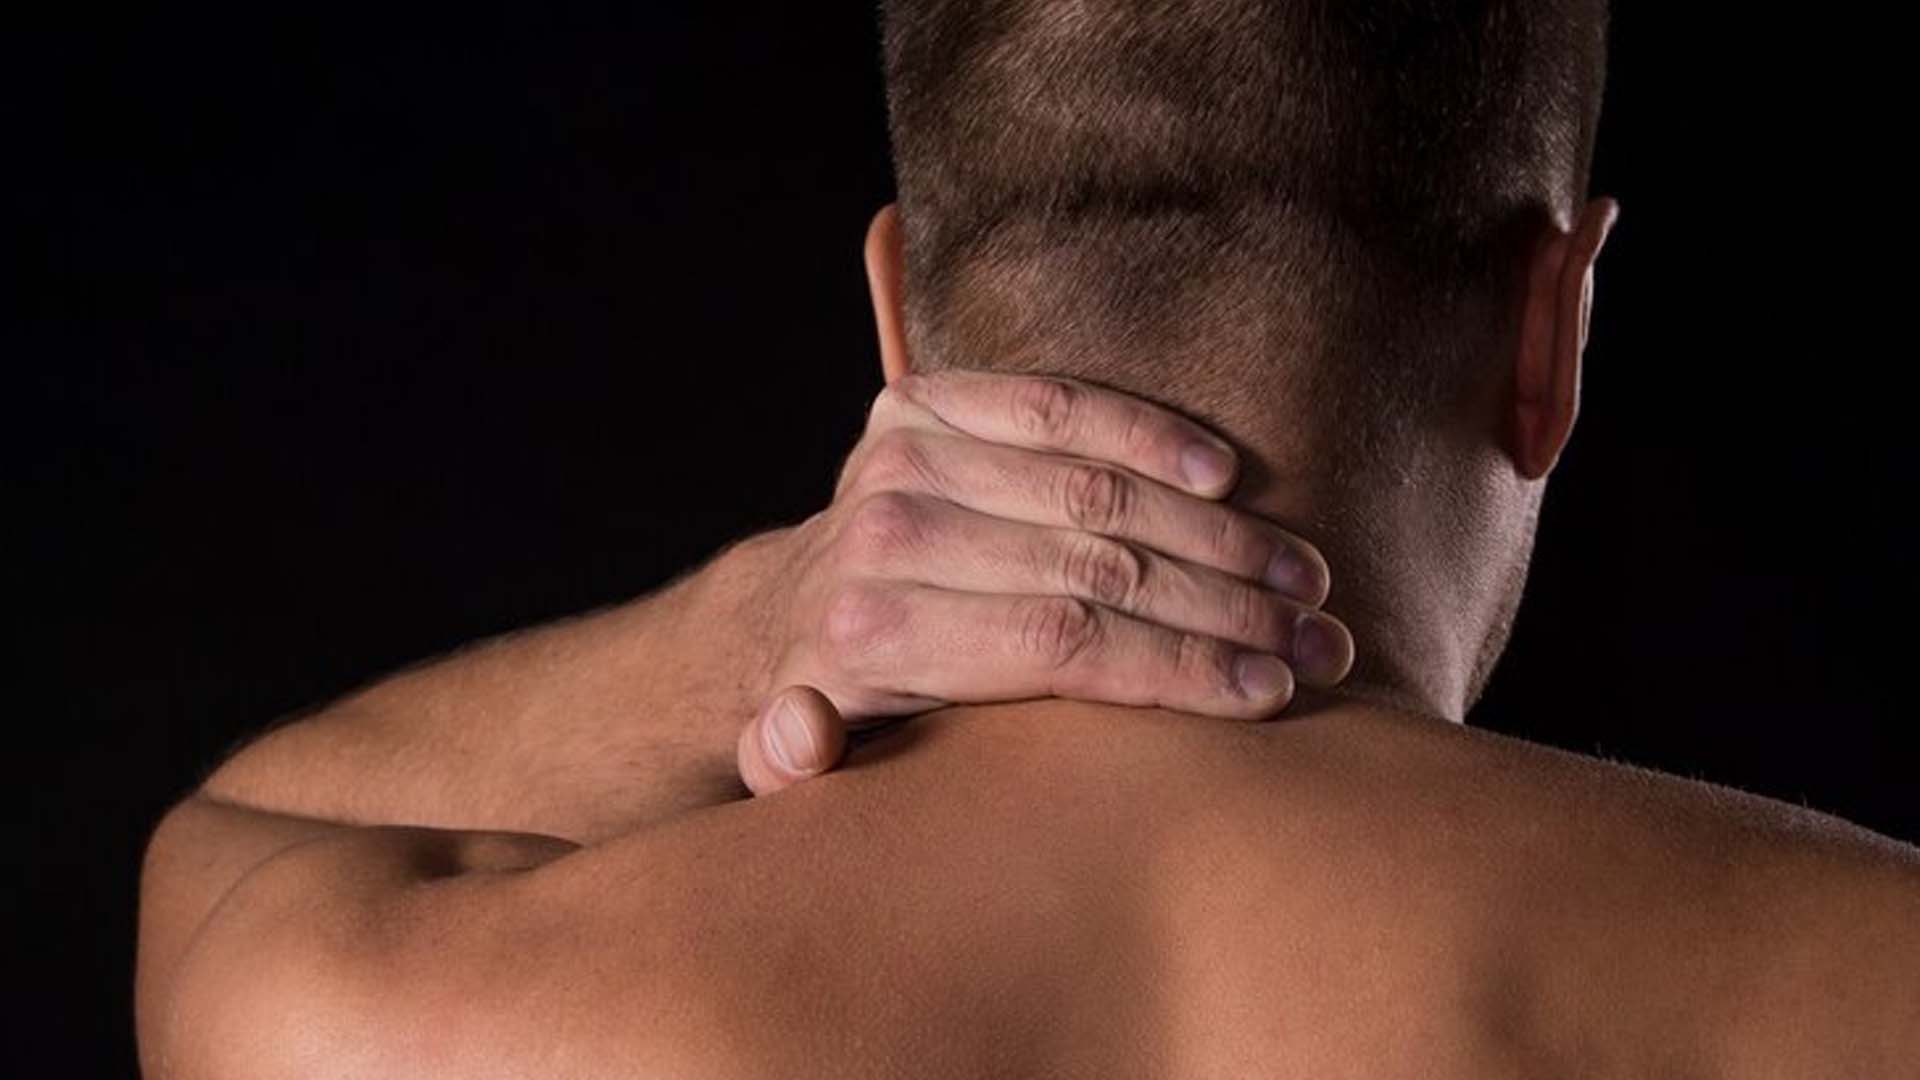 What are the Home Remedies to remove Darkness on the Neck?